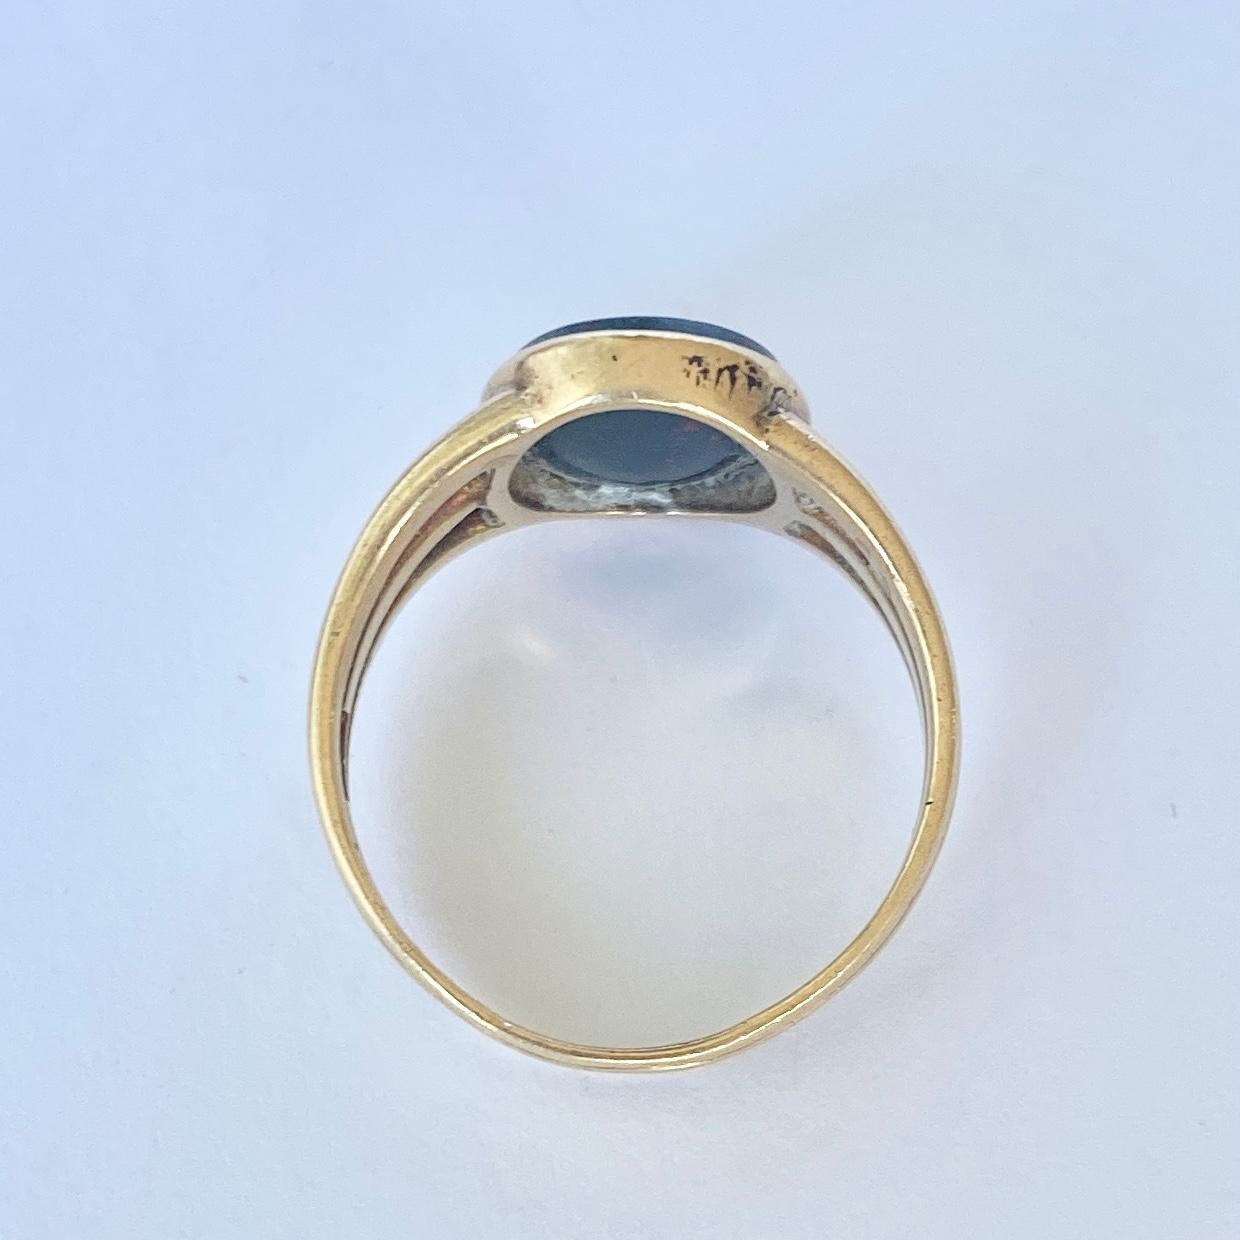 This chunky bloodstone signet ring has engraving of the initials 'CCS' highlighted in gold. Modelled in 18carat gold. Fully hallmarked London 1917.

Ring Size:U or 10
Stone Dimensions: 13x10mm

Weight: 5.9g